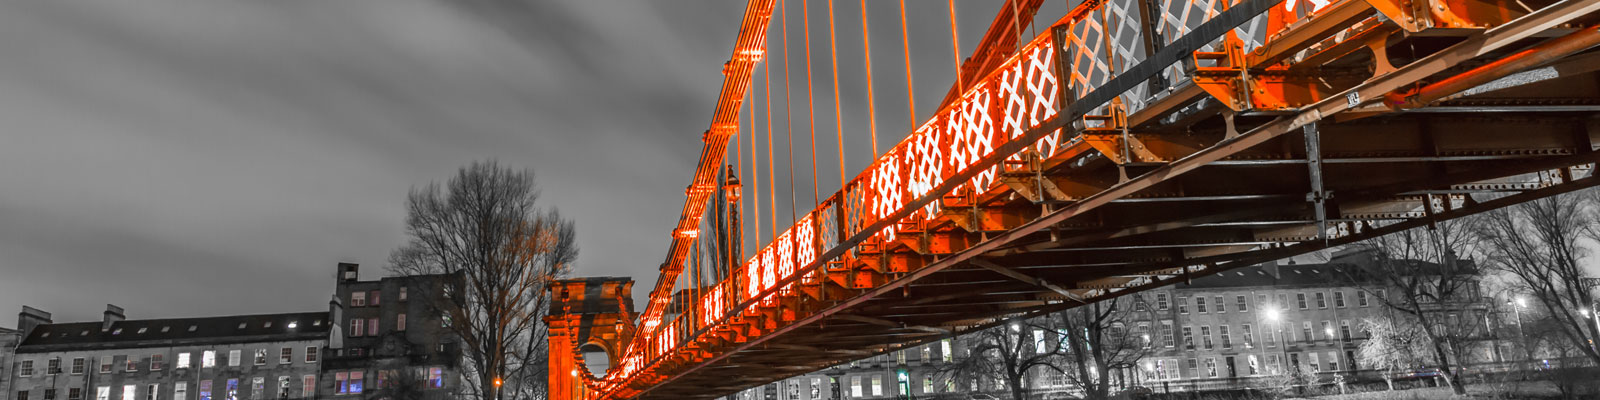 This is an image of the South Portland suspension bridge. ASTA-USA provides professional translation services in this city.